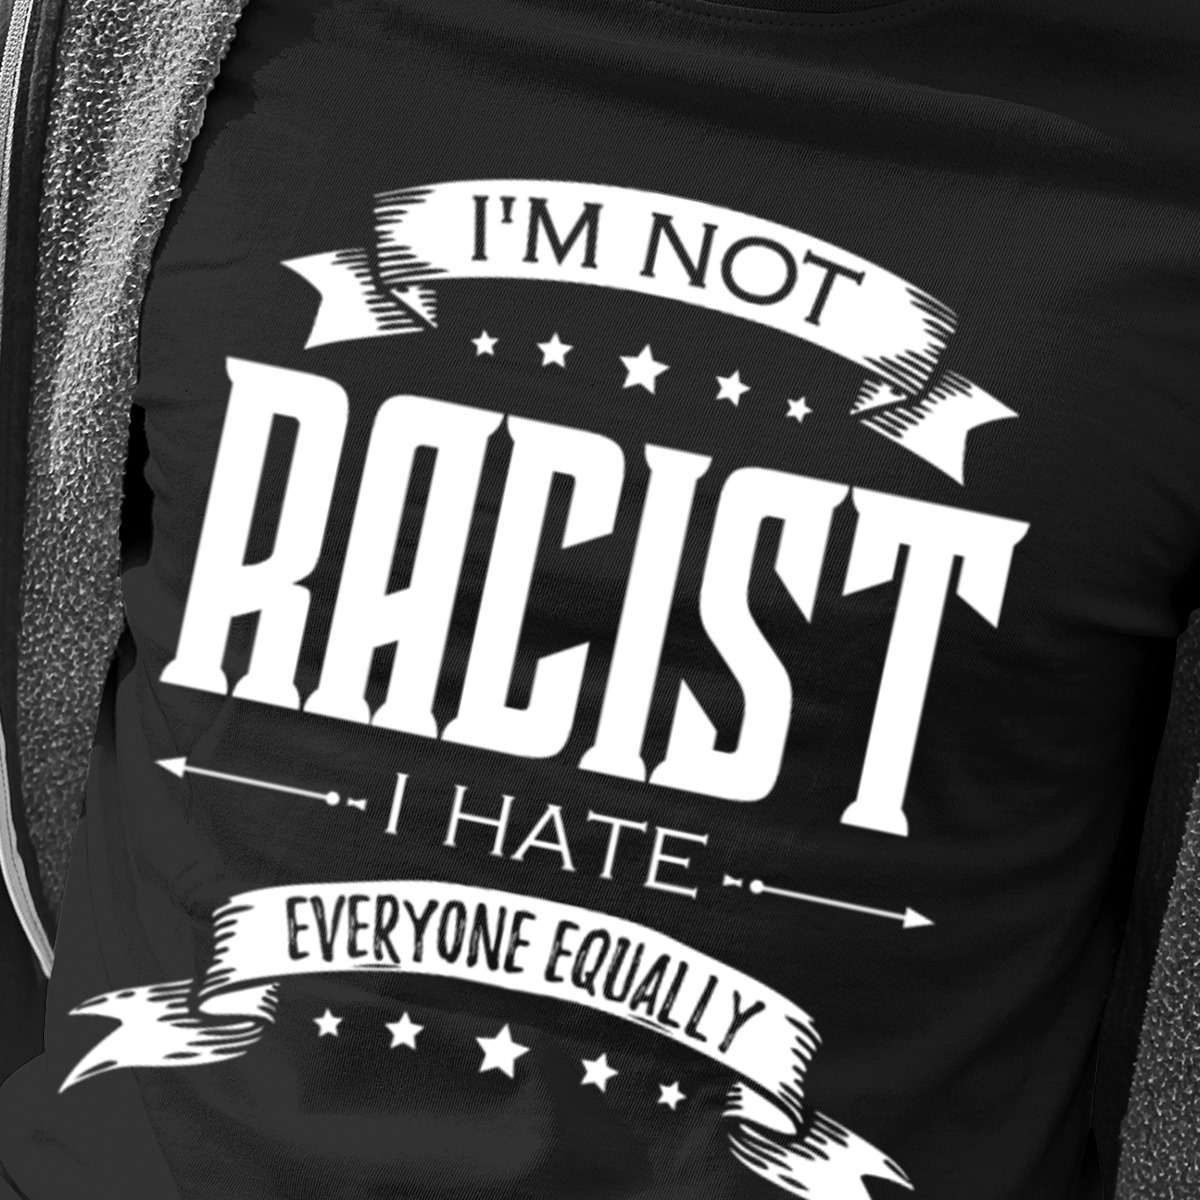 I'm not racist I hate everyone equality - Racism and equality